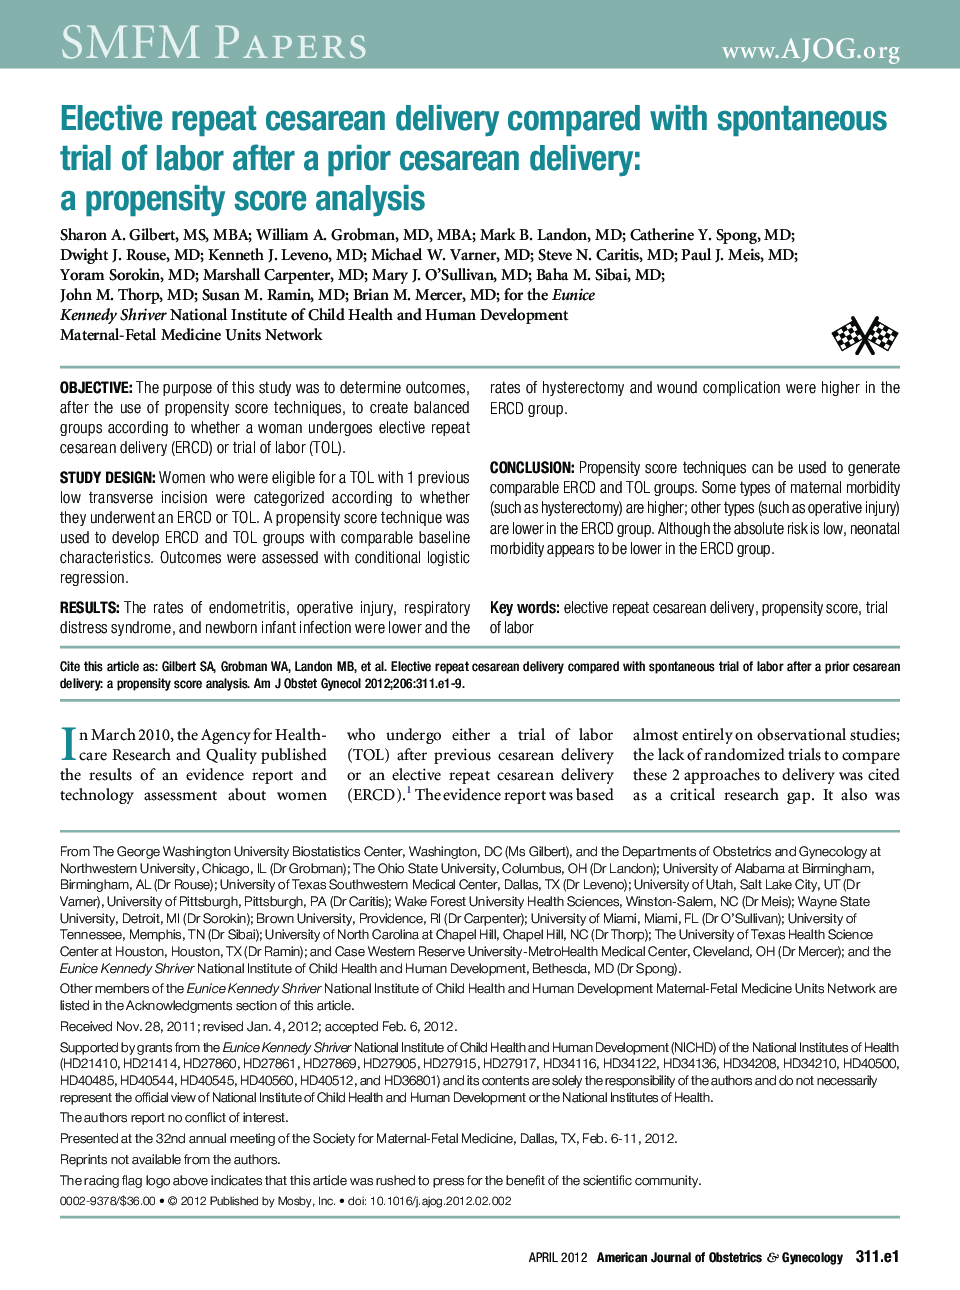 Elective repeat cesarean delivery compared with spontaneous trial of labor after a prior cesarean delivery: a propensity score analysis